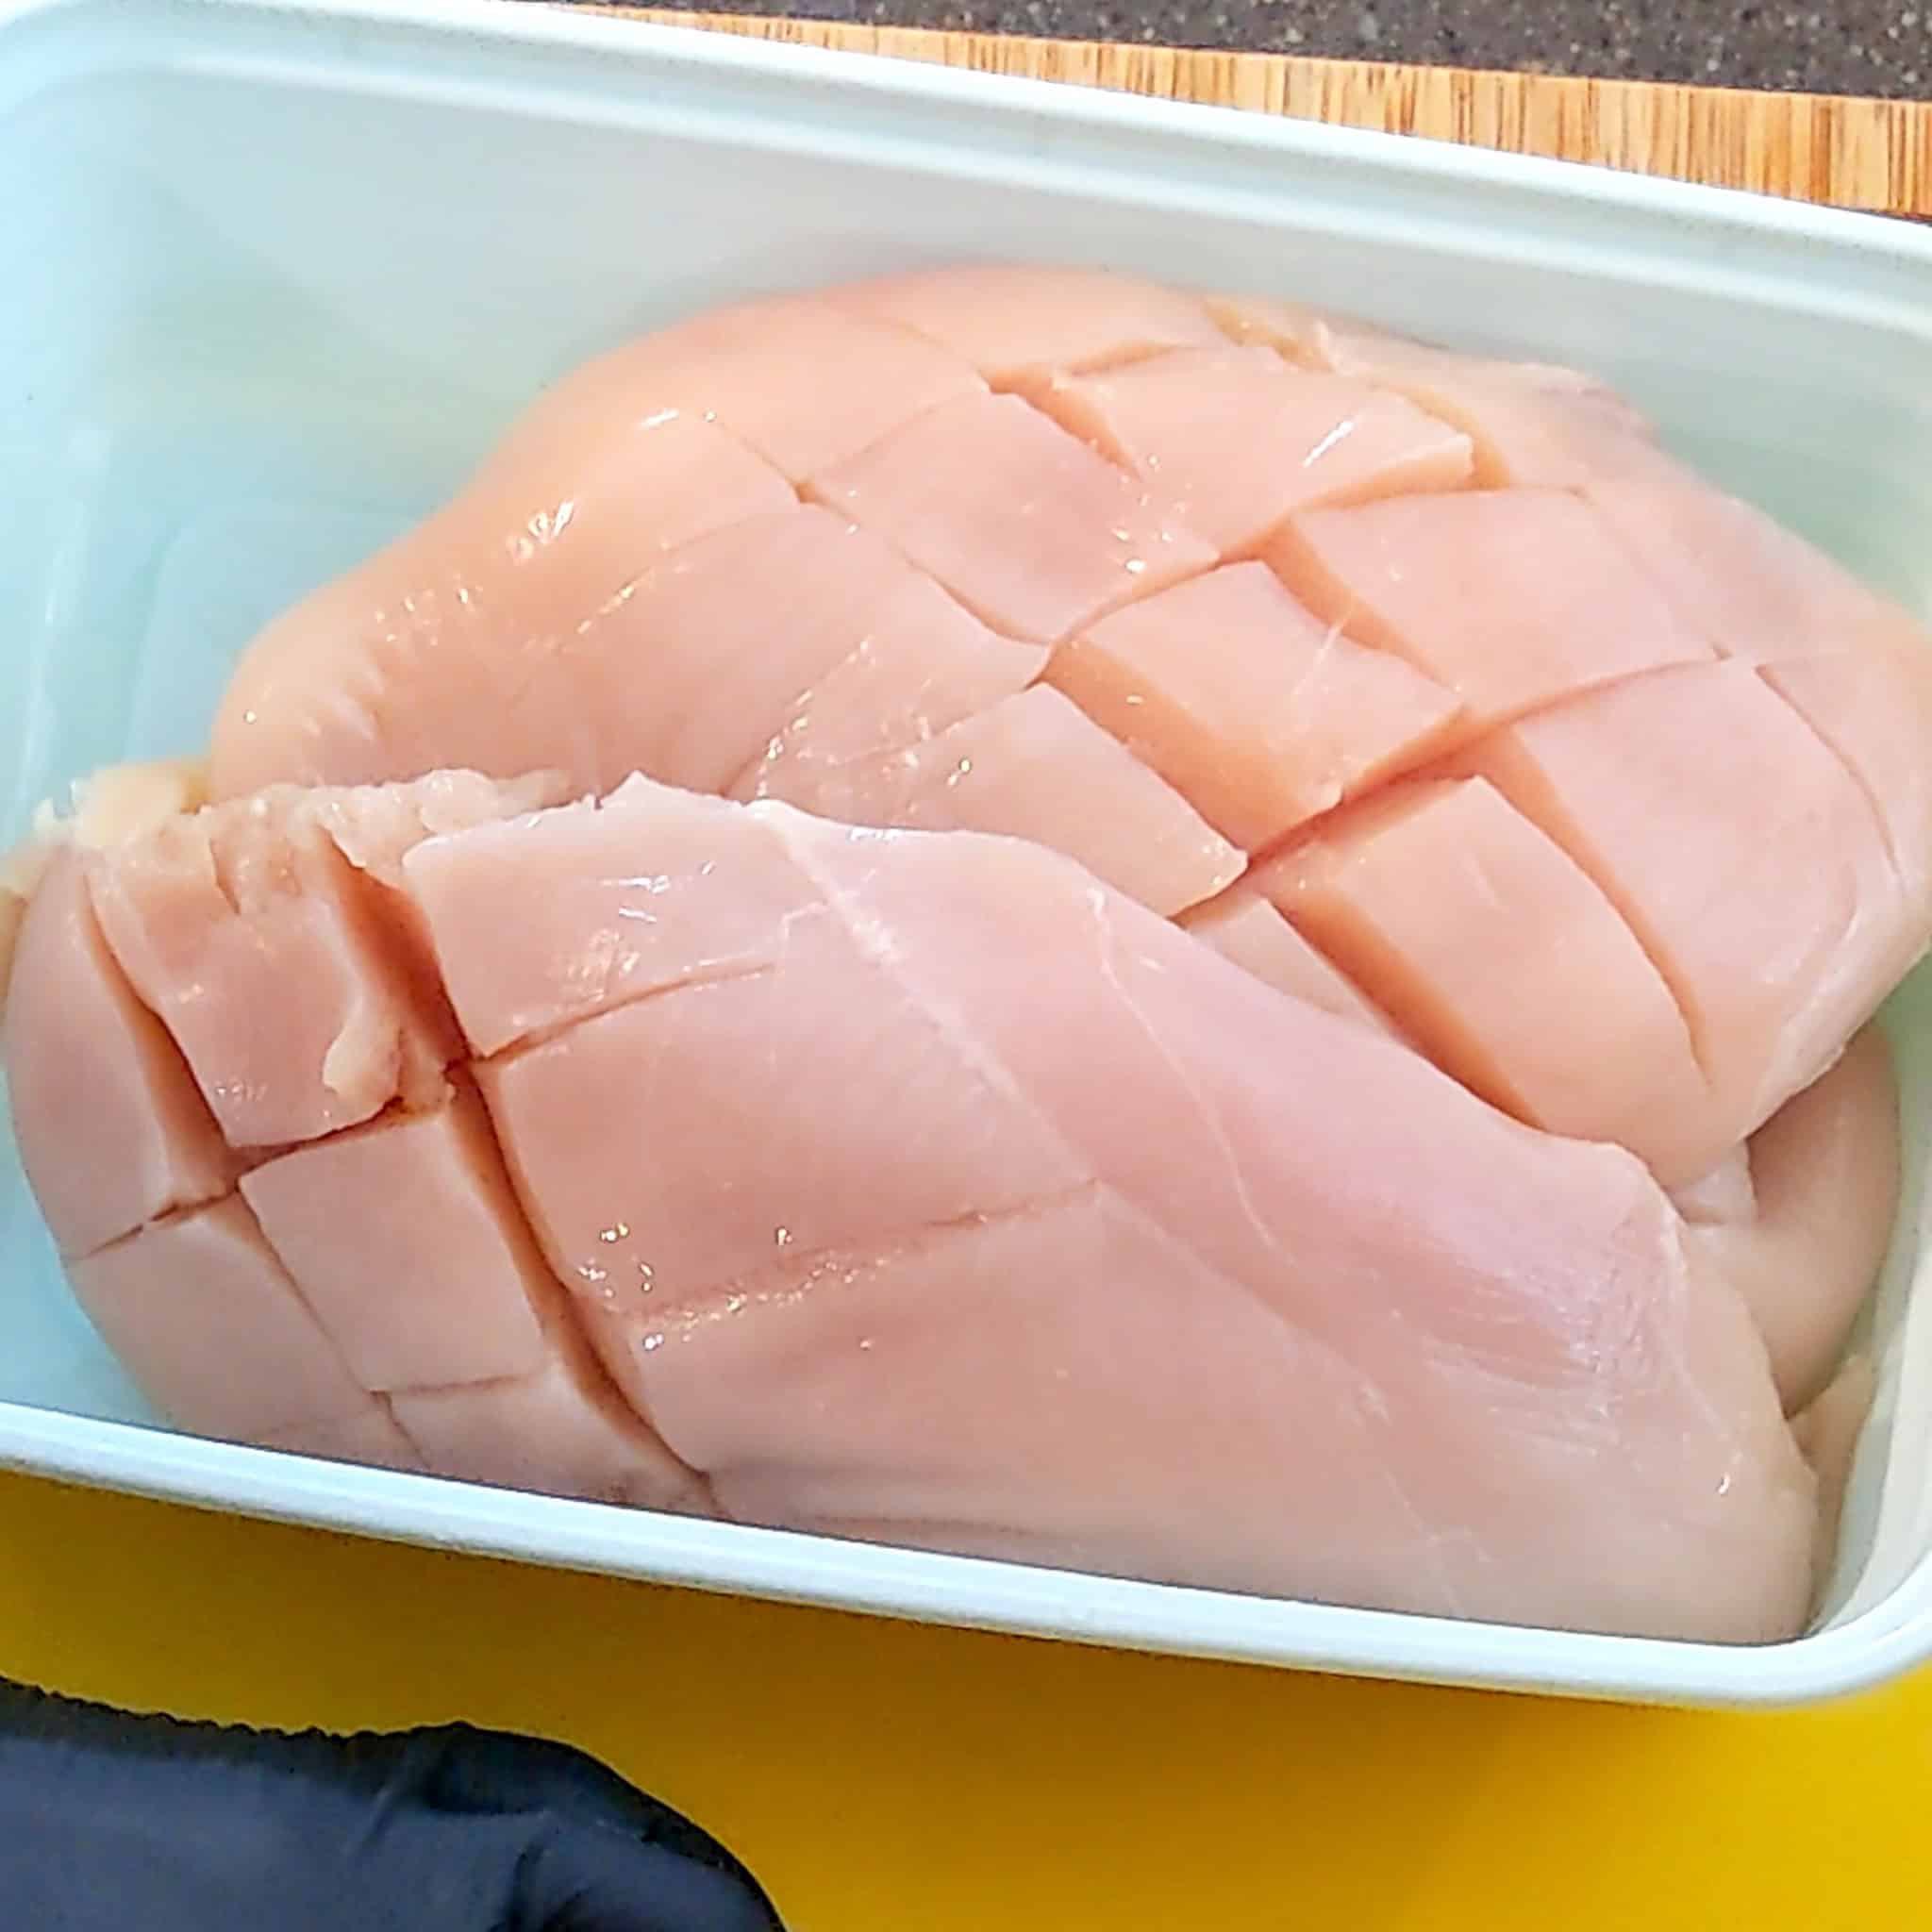 Diamond slit chicken breasts in a plastic container.